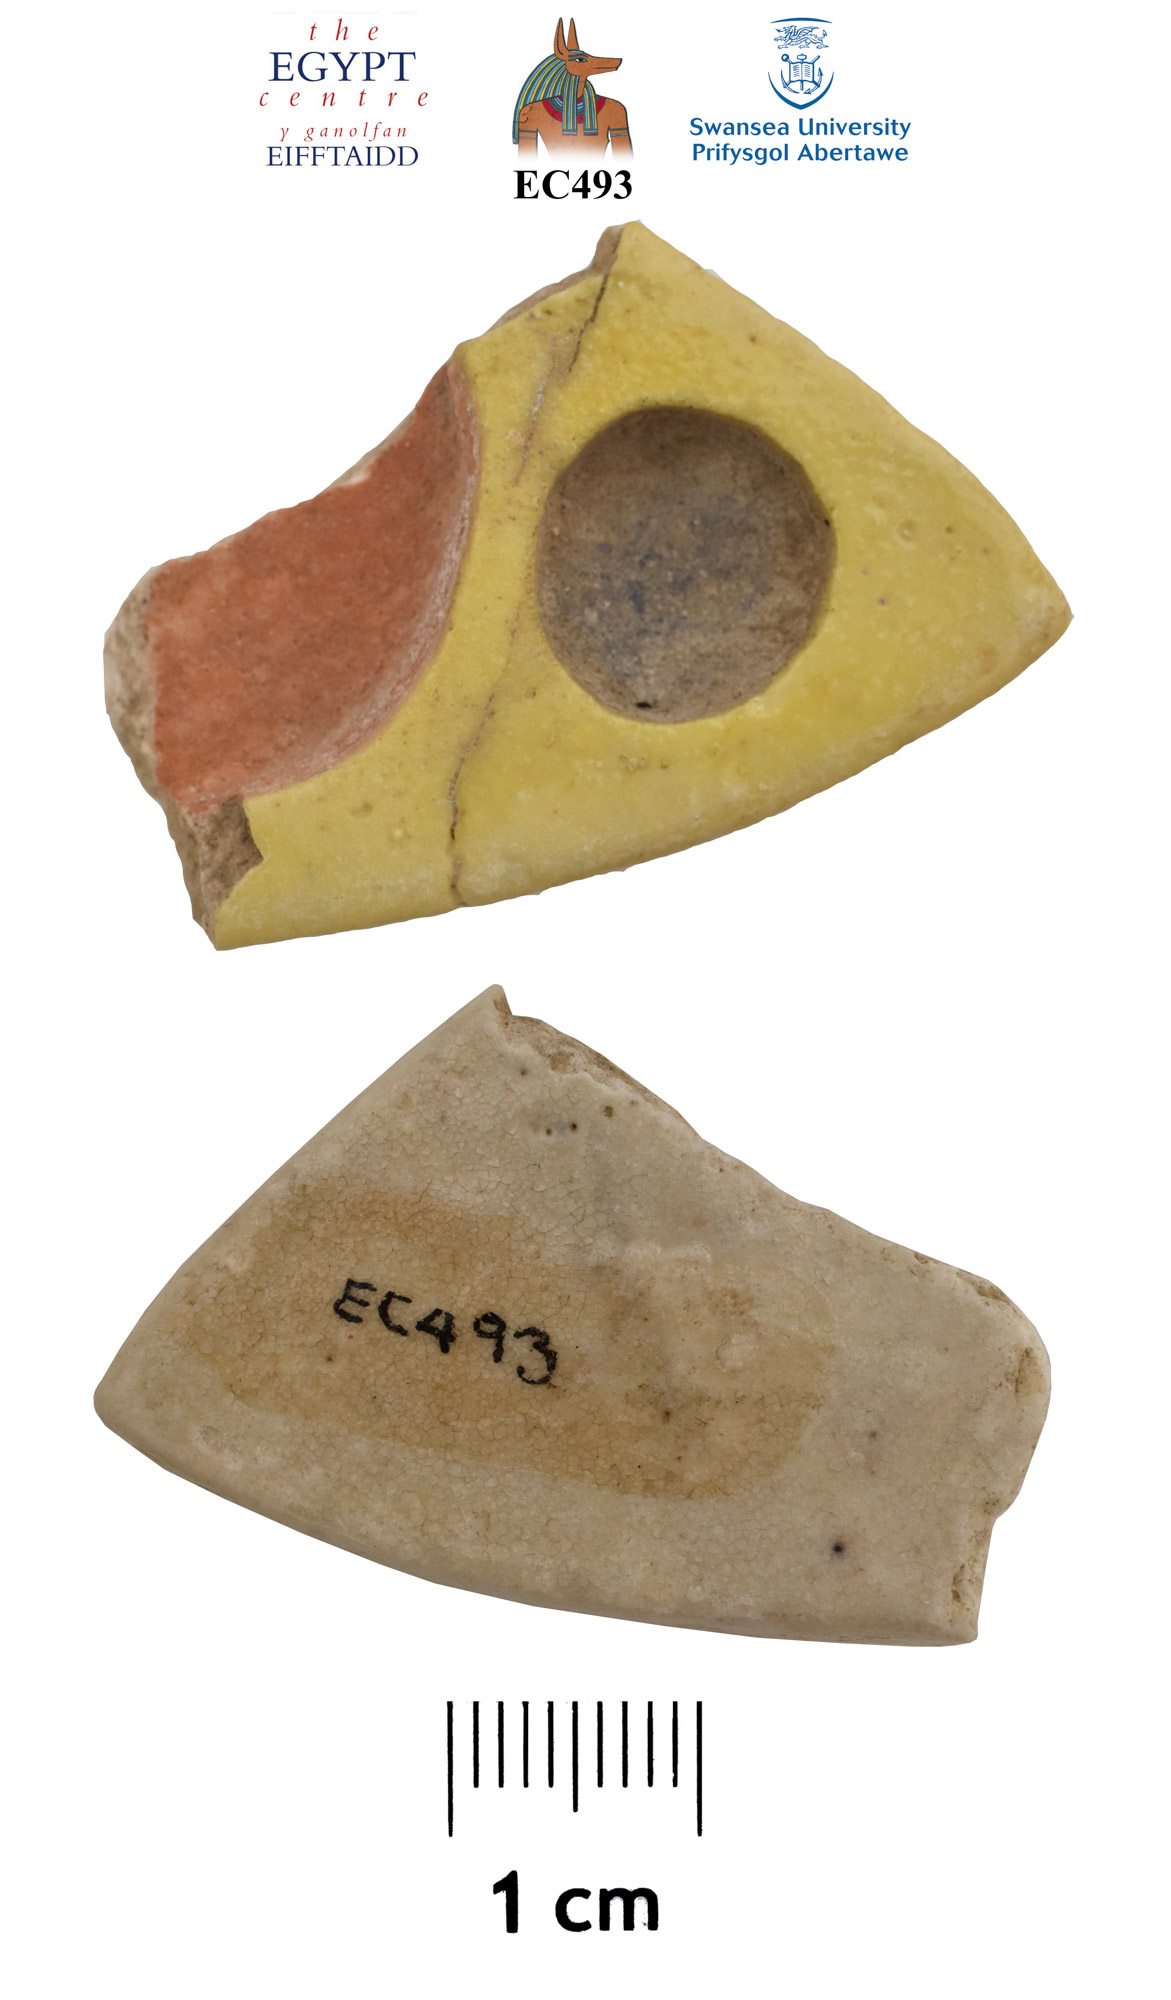 Image for: Fragment of a faience object